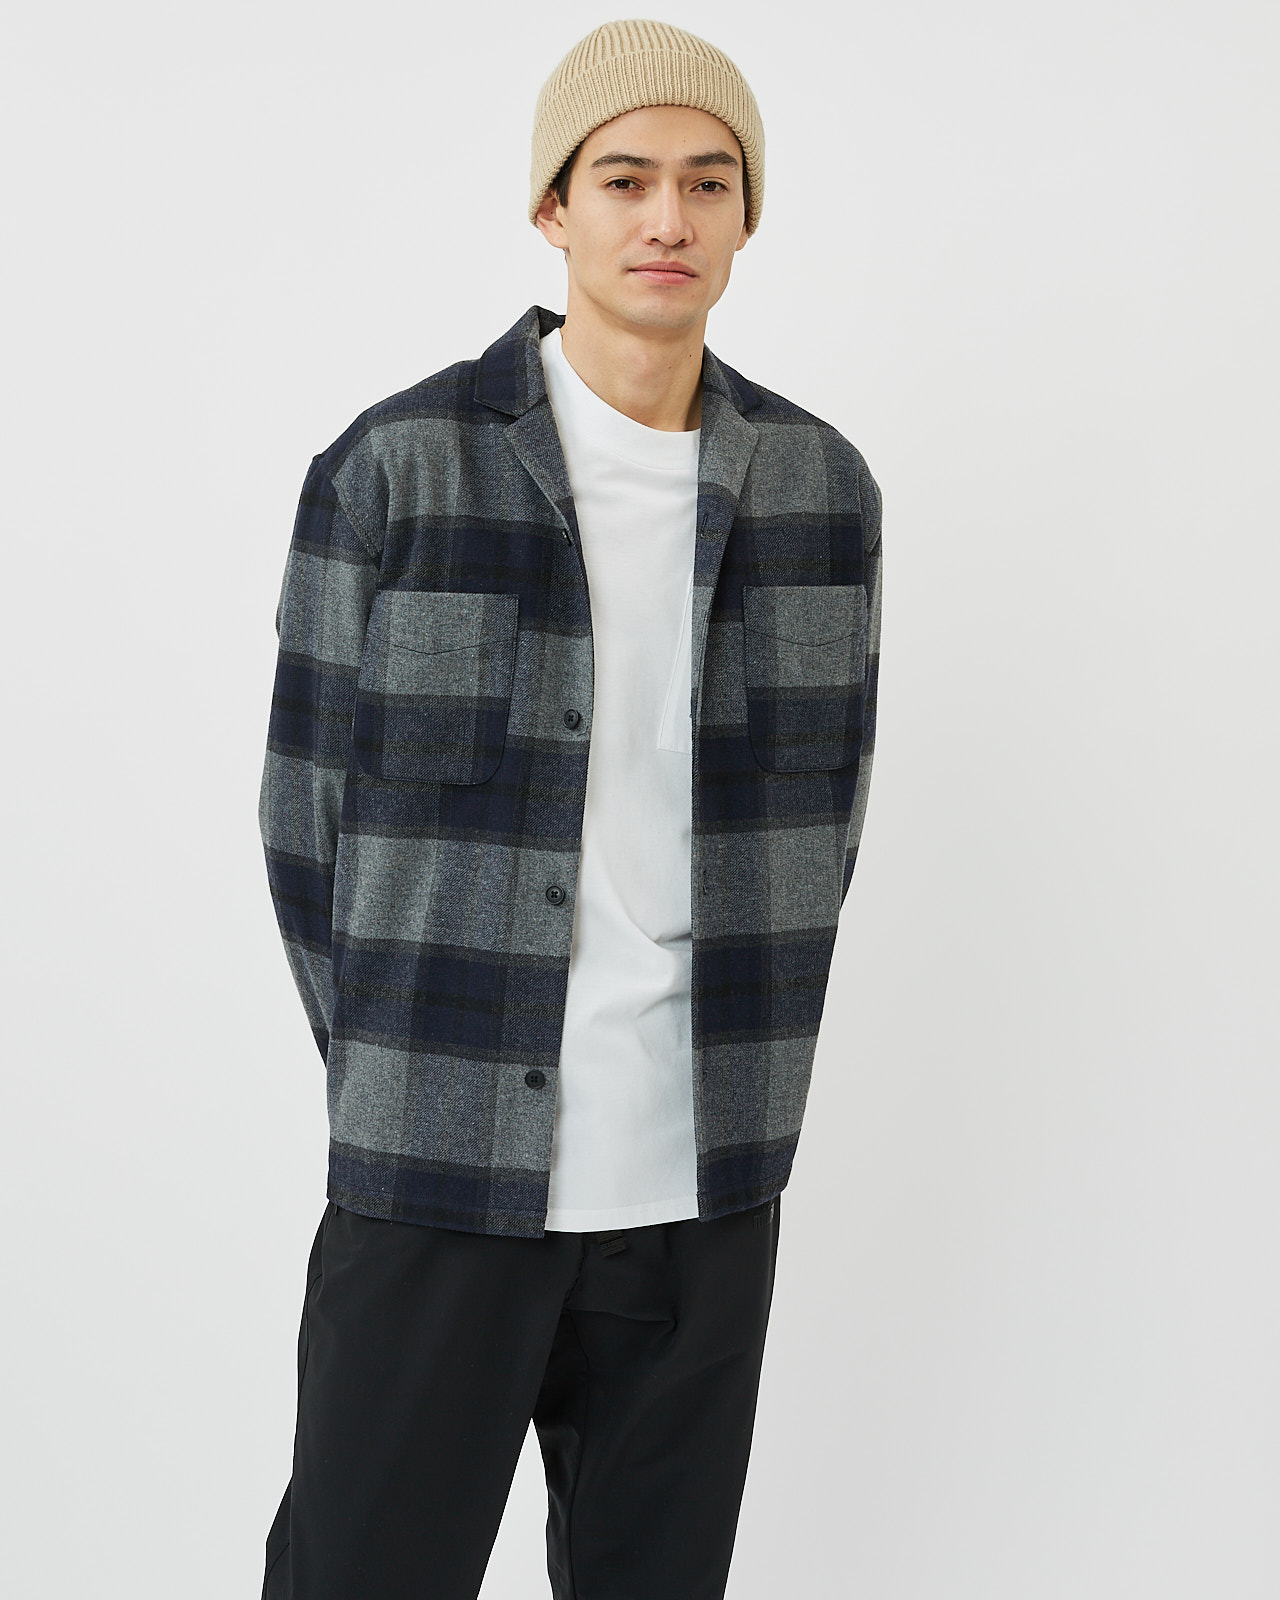 Minimum Men's Laurel Overshirt in Grey Melange worn over a white tee paired with black pants and a beige beanie